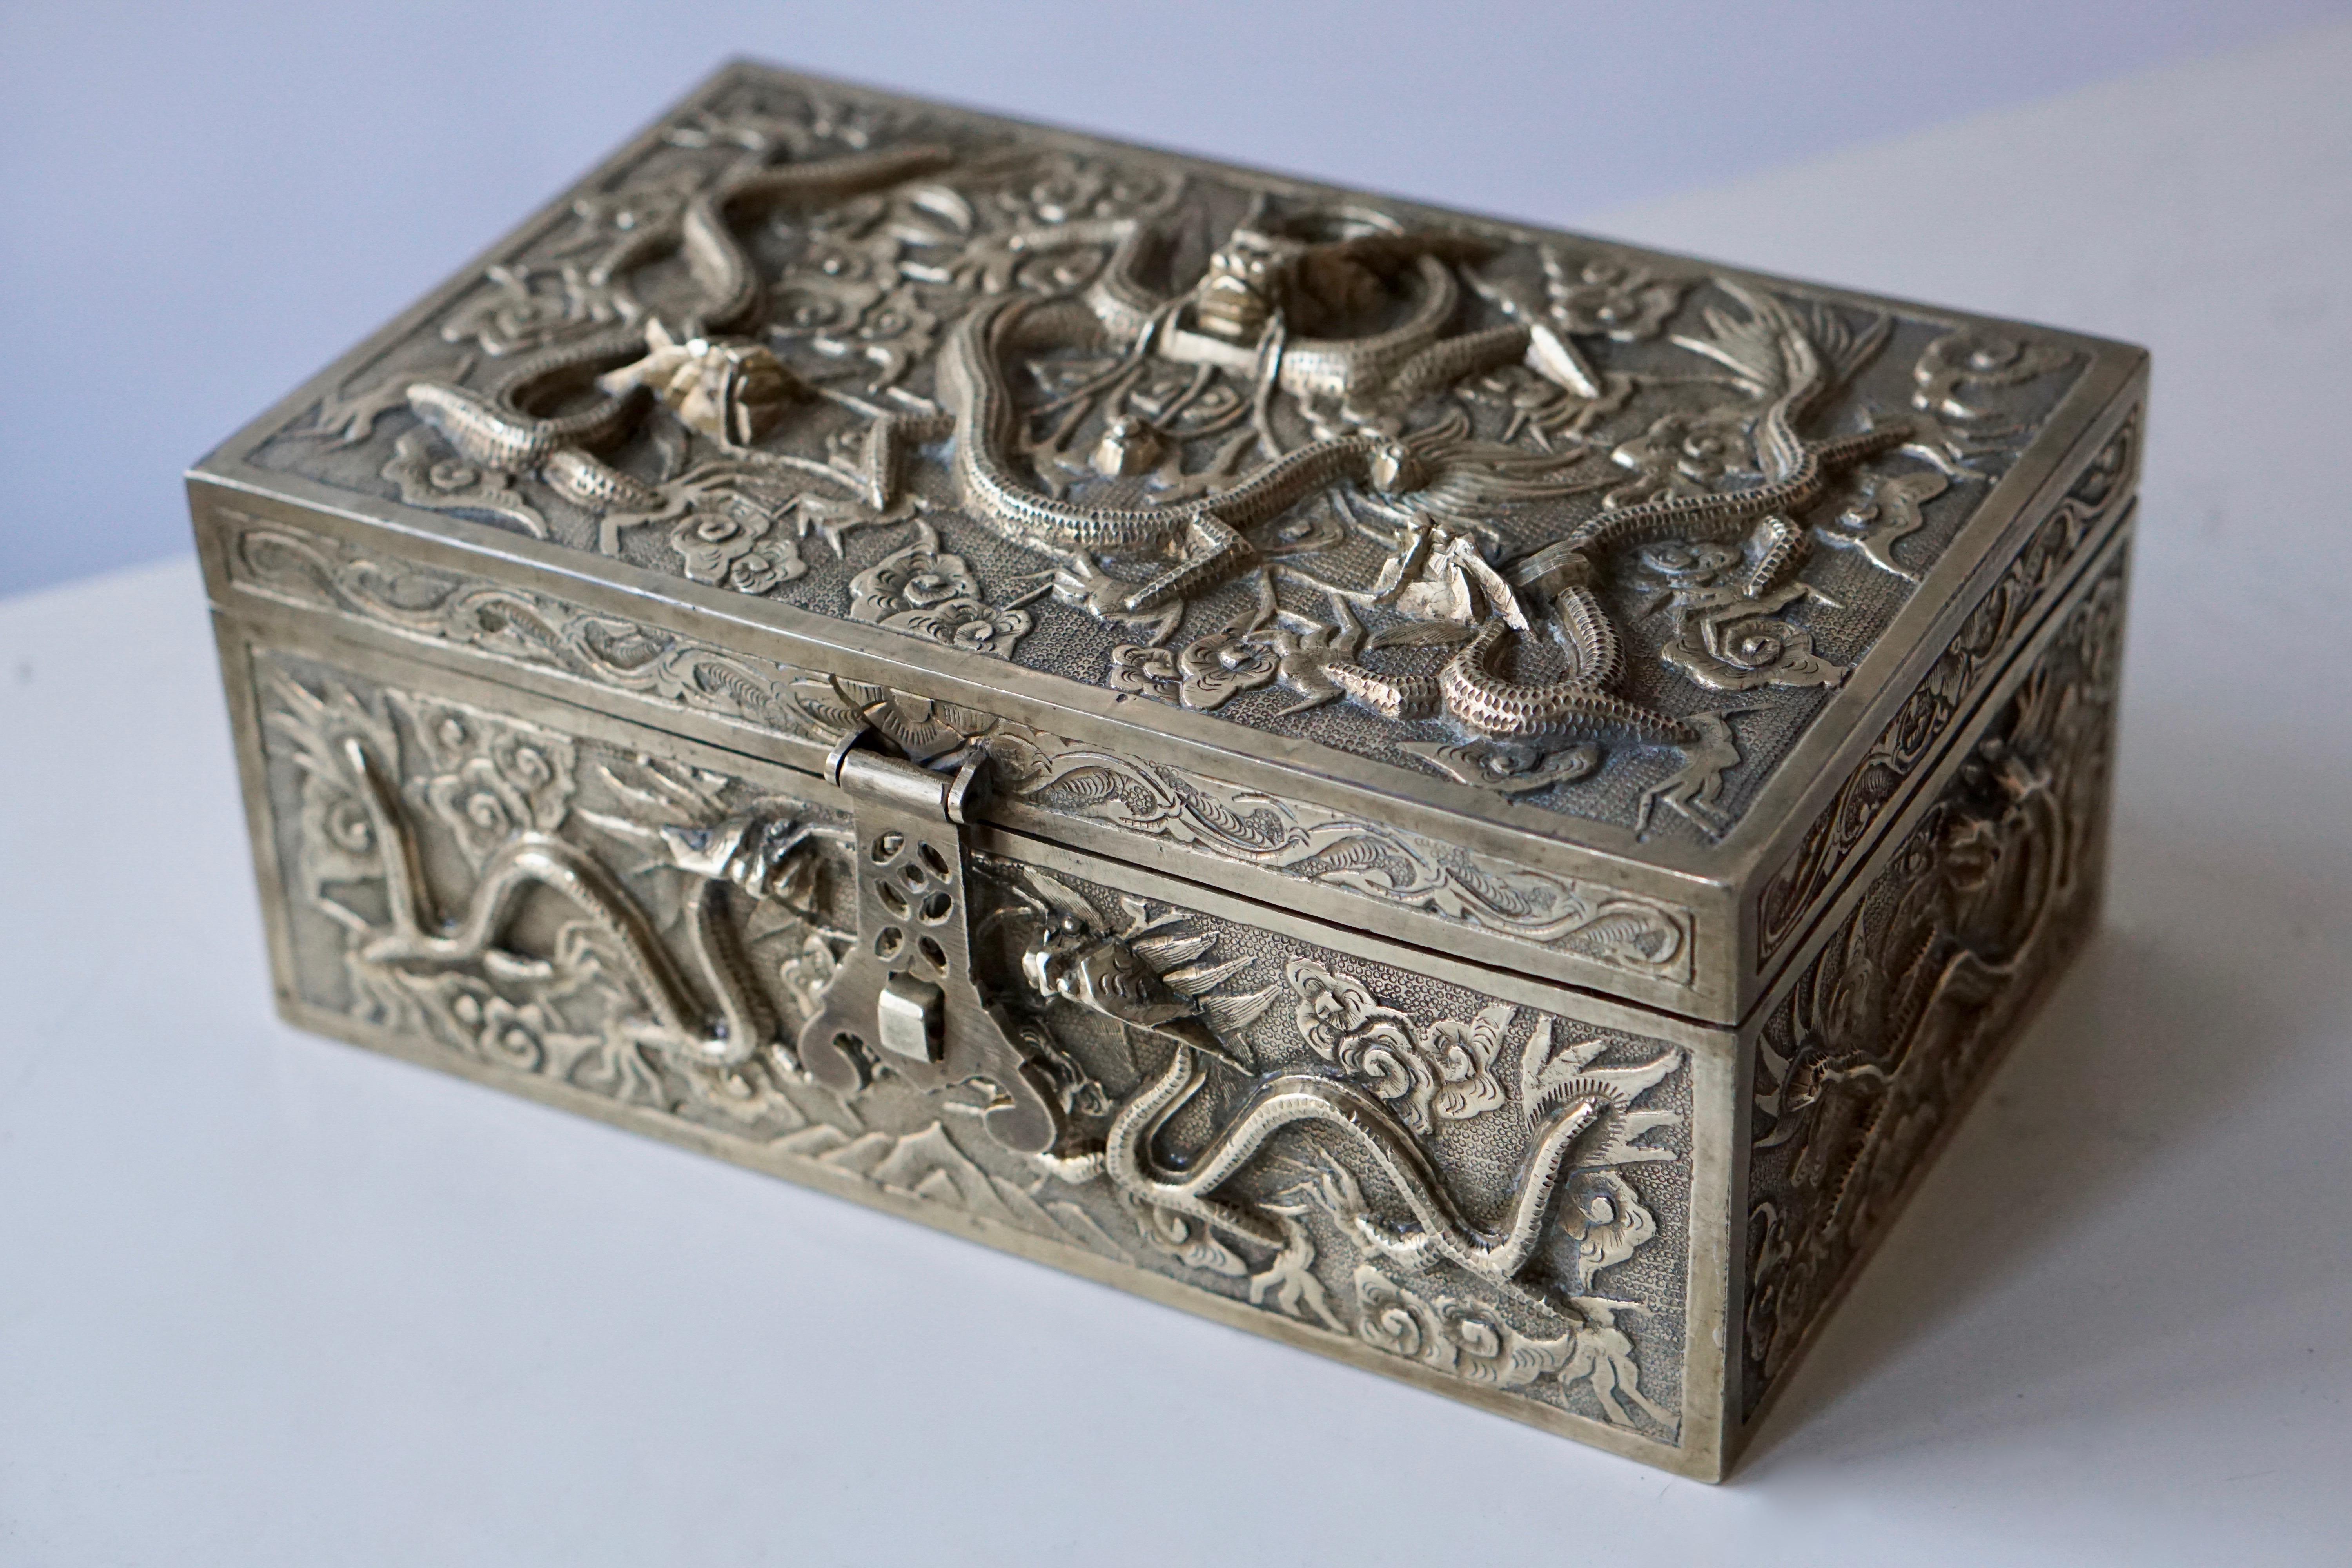 An exceptional, fine and impressive jewelry box.
The surface of this box is embellished with dragons and flowers.
The box is fitted with a hinged cover.
Measures: Width 24 cm.
Depth 16 cm.
Height 11 cm.
Weight 3 kg.